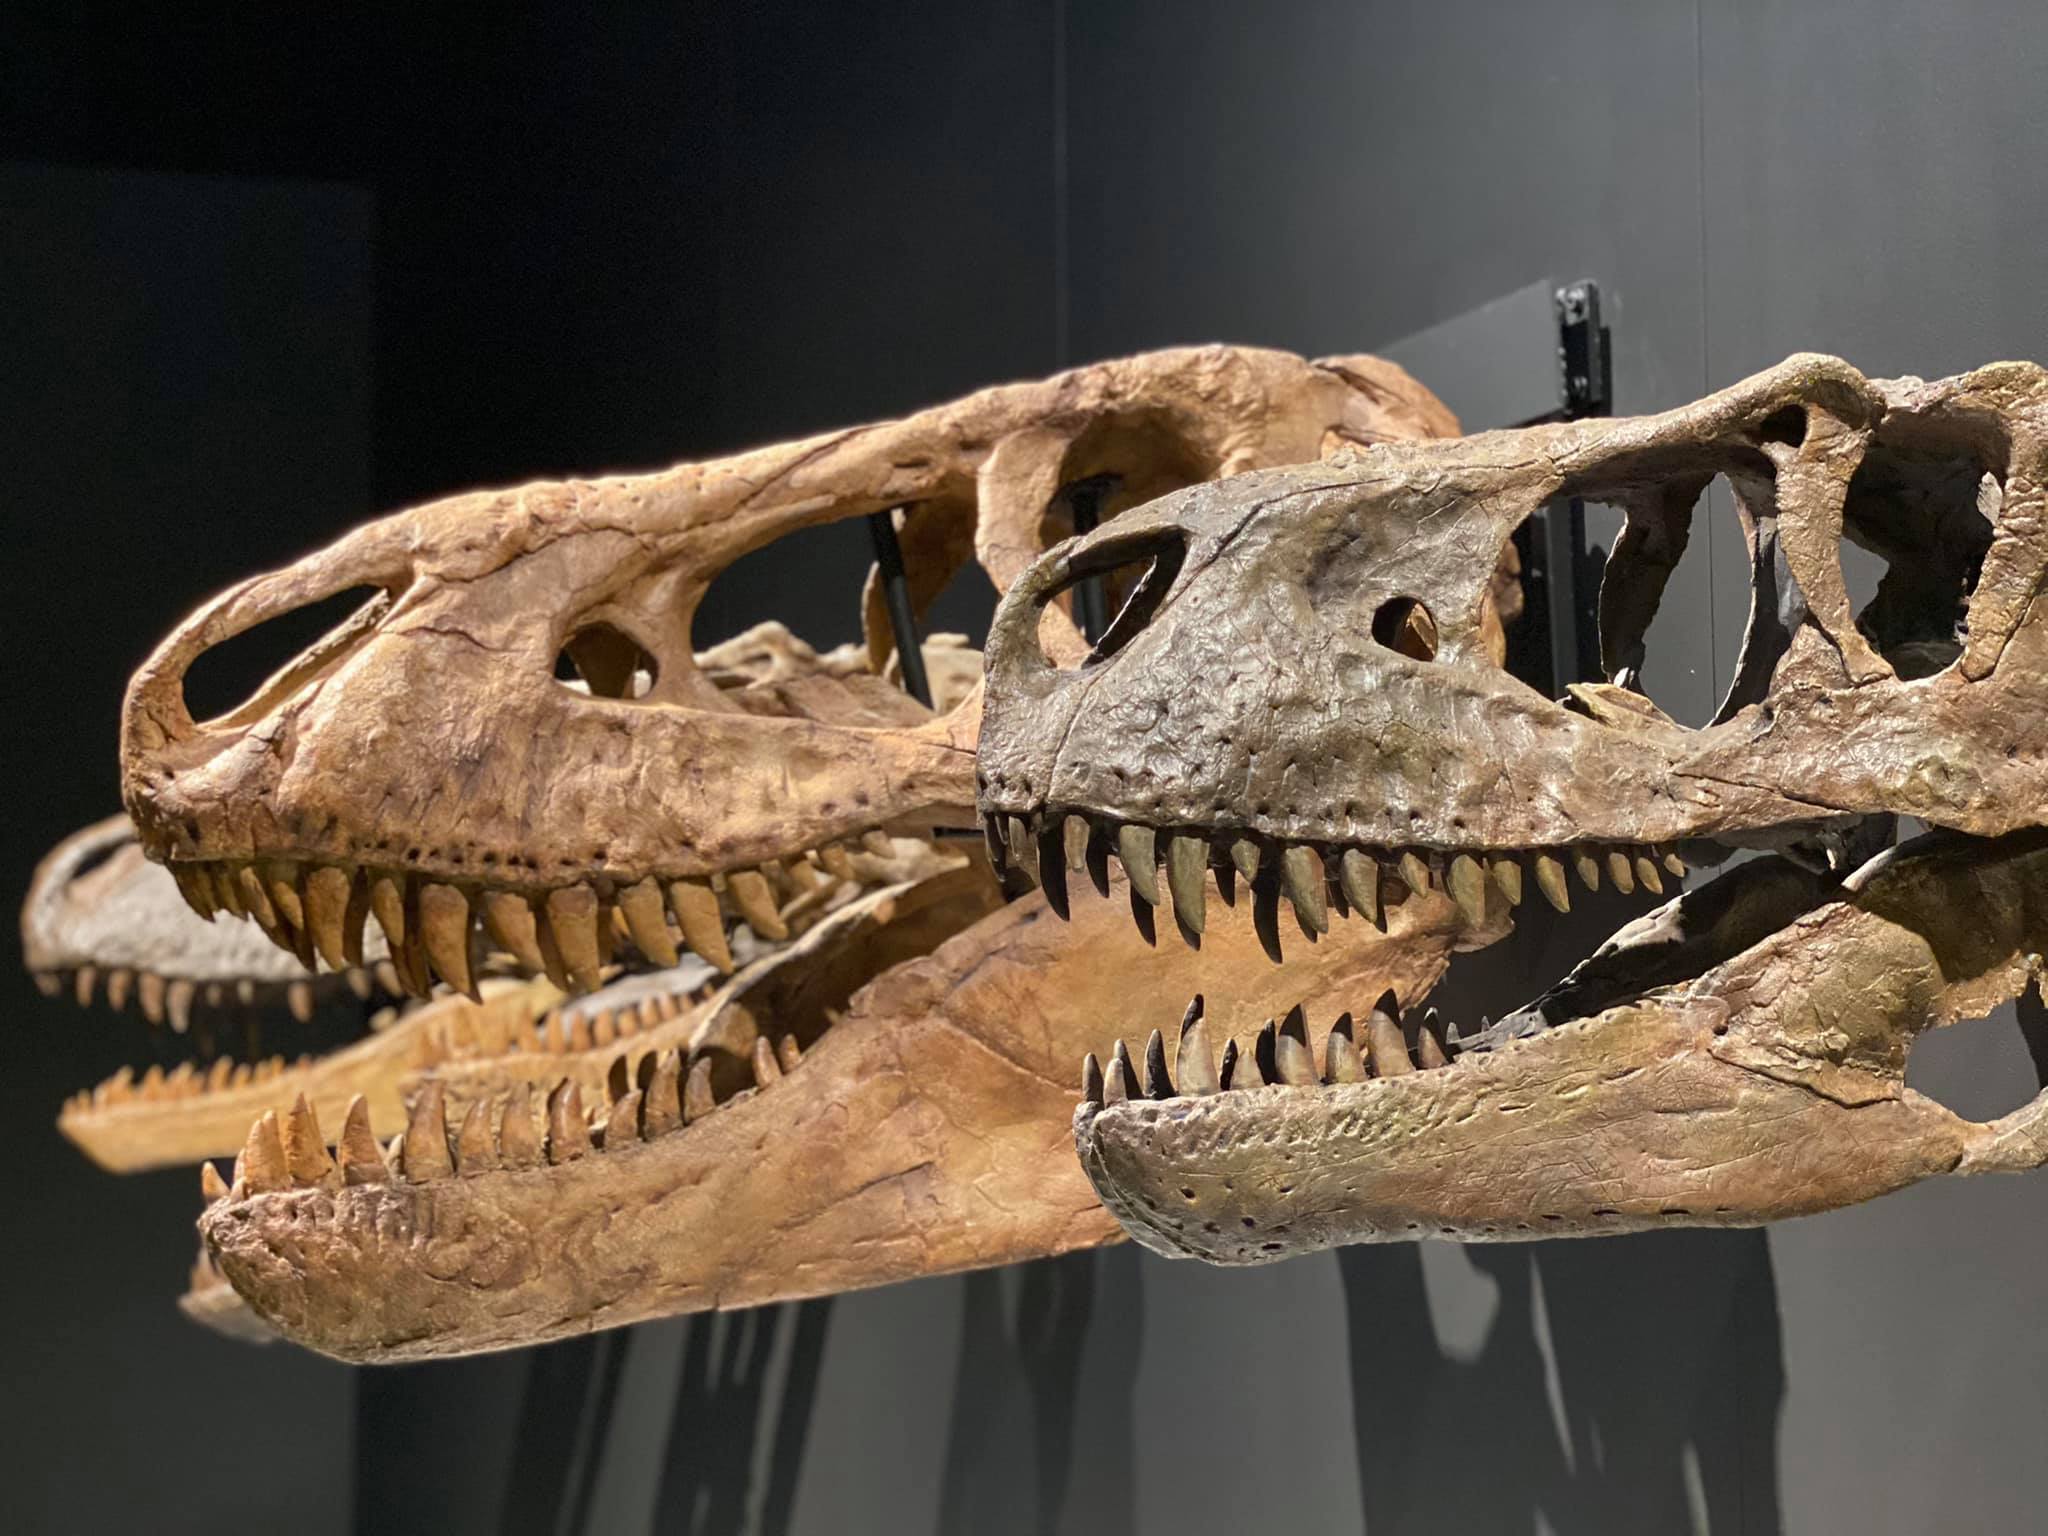 Dinosaurs in Sydney | The Best Sydney museum to see dinosaurs